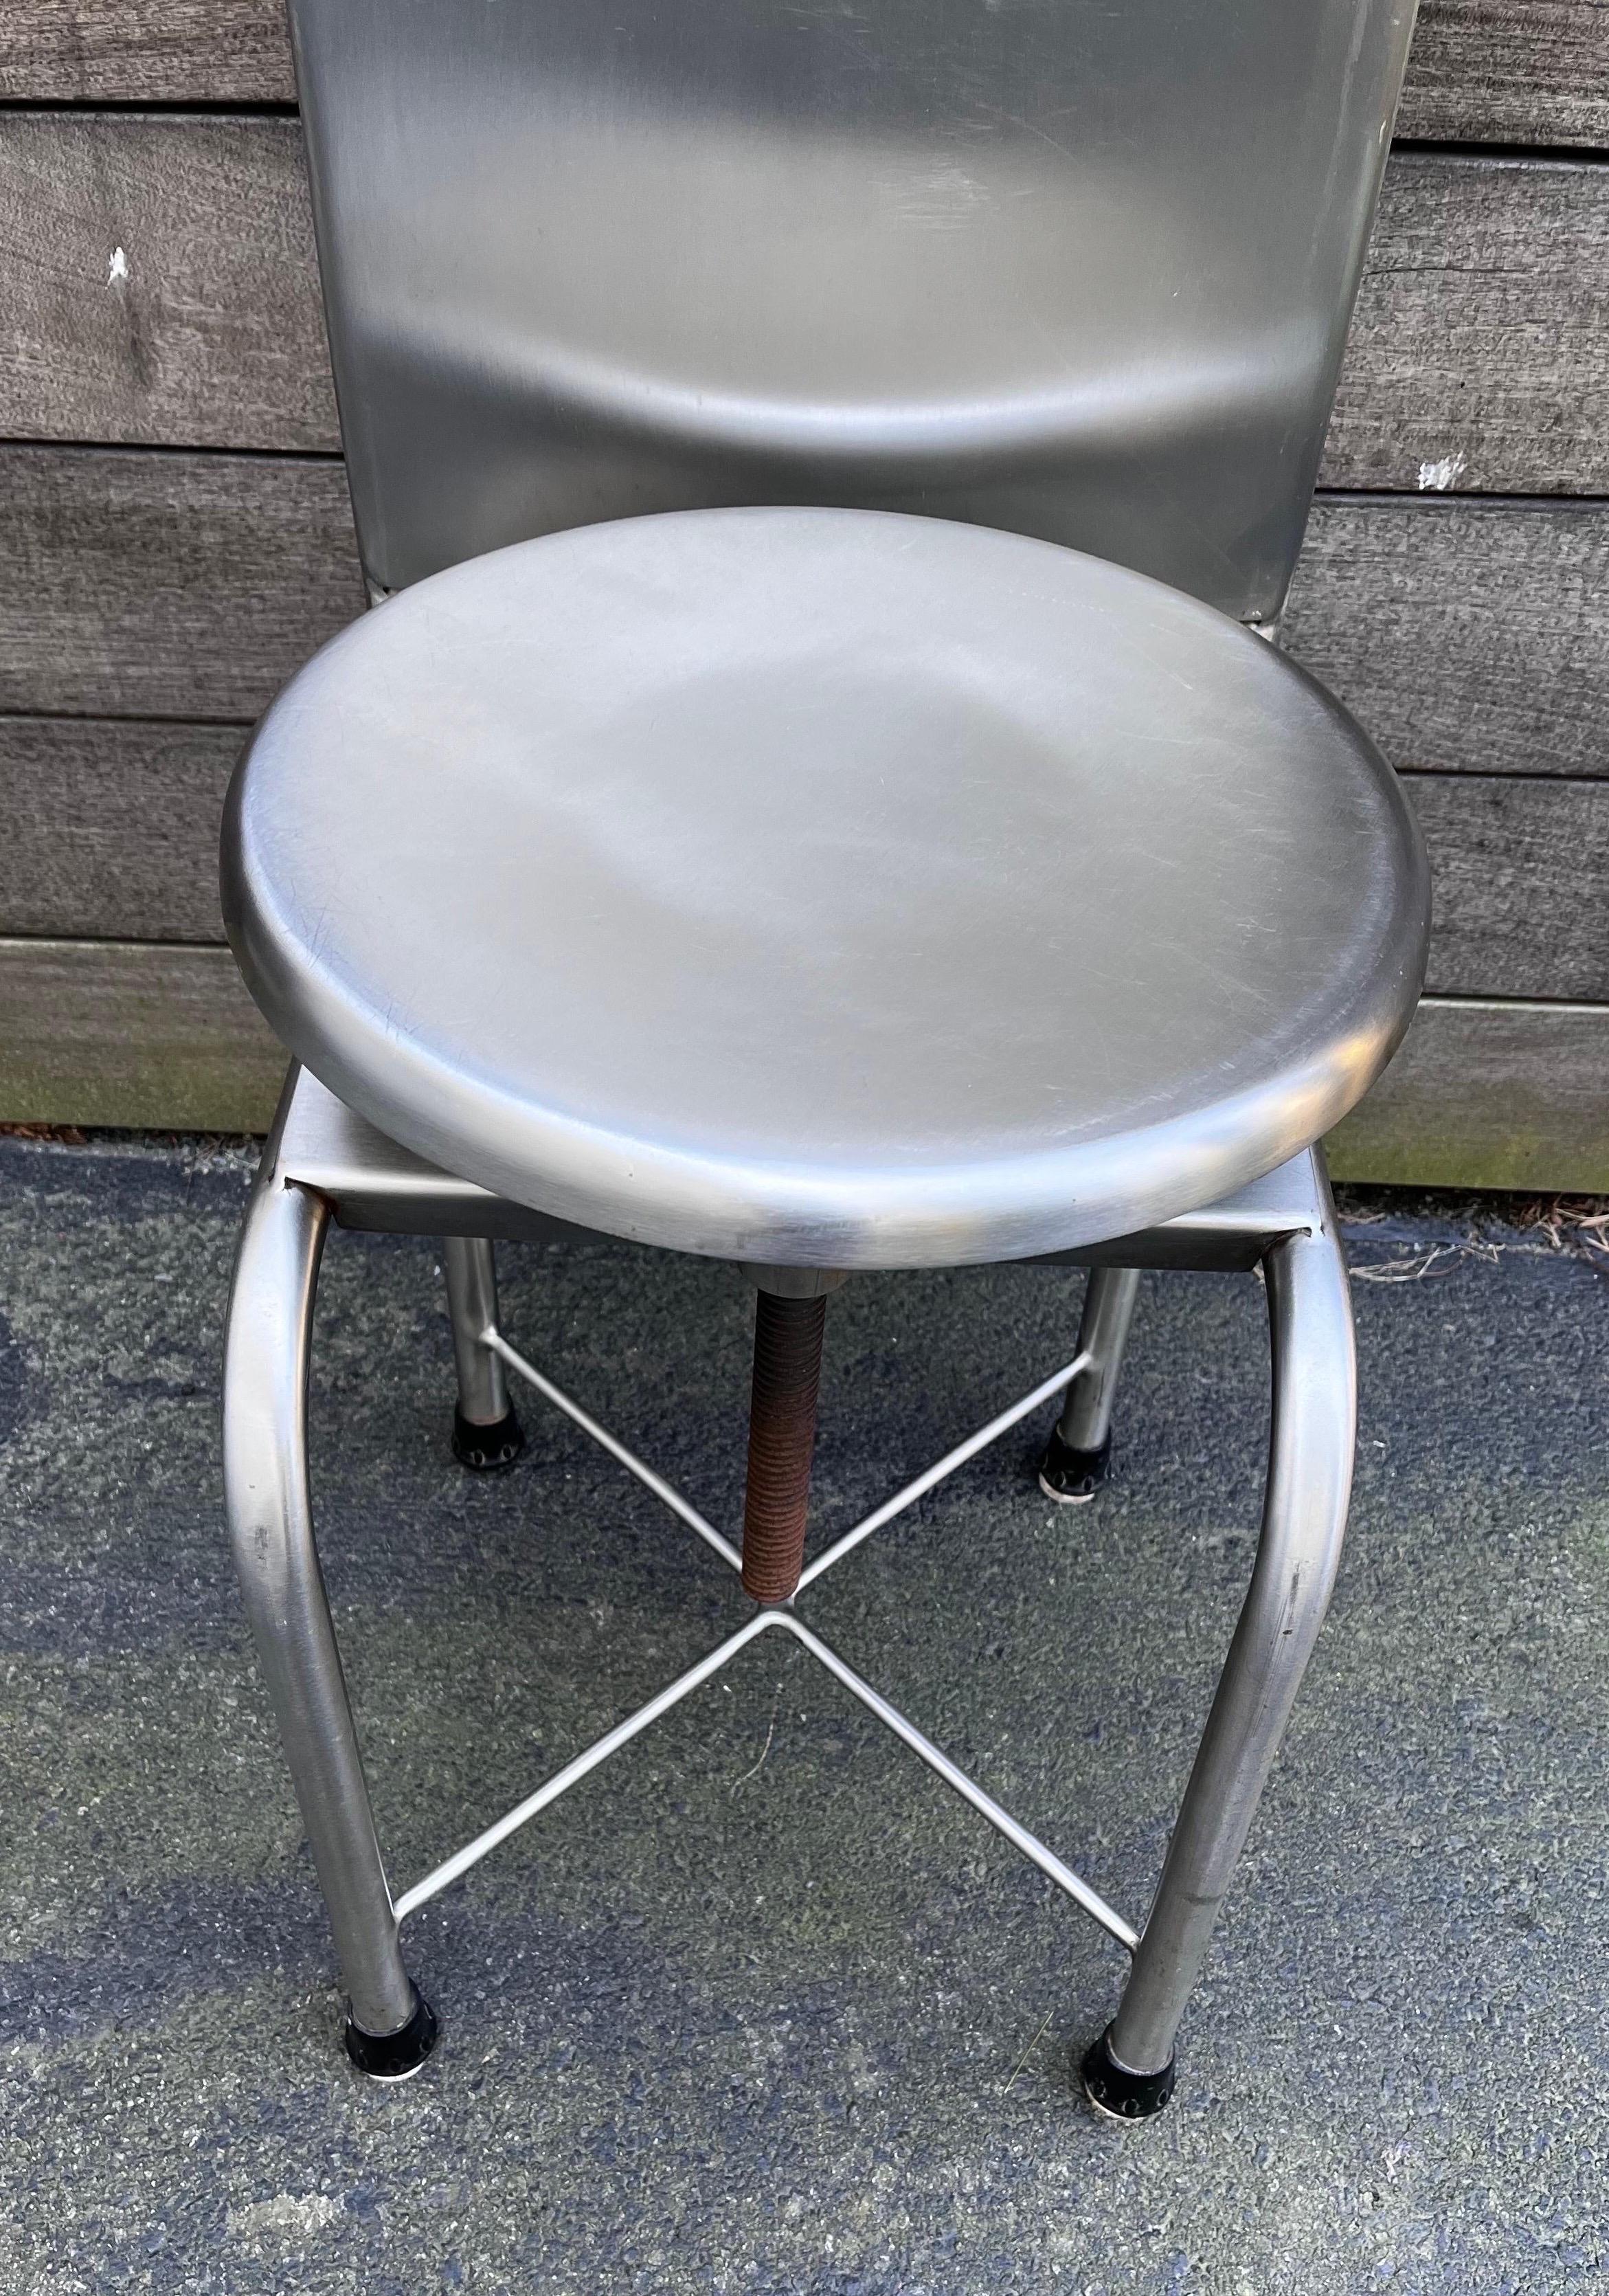 Vintage Industrial Age High Back Swivel Medical Chair In Good Condition For Sale In Philadelphia, PA